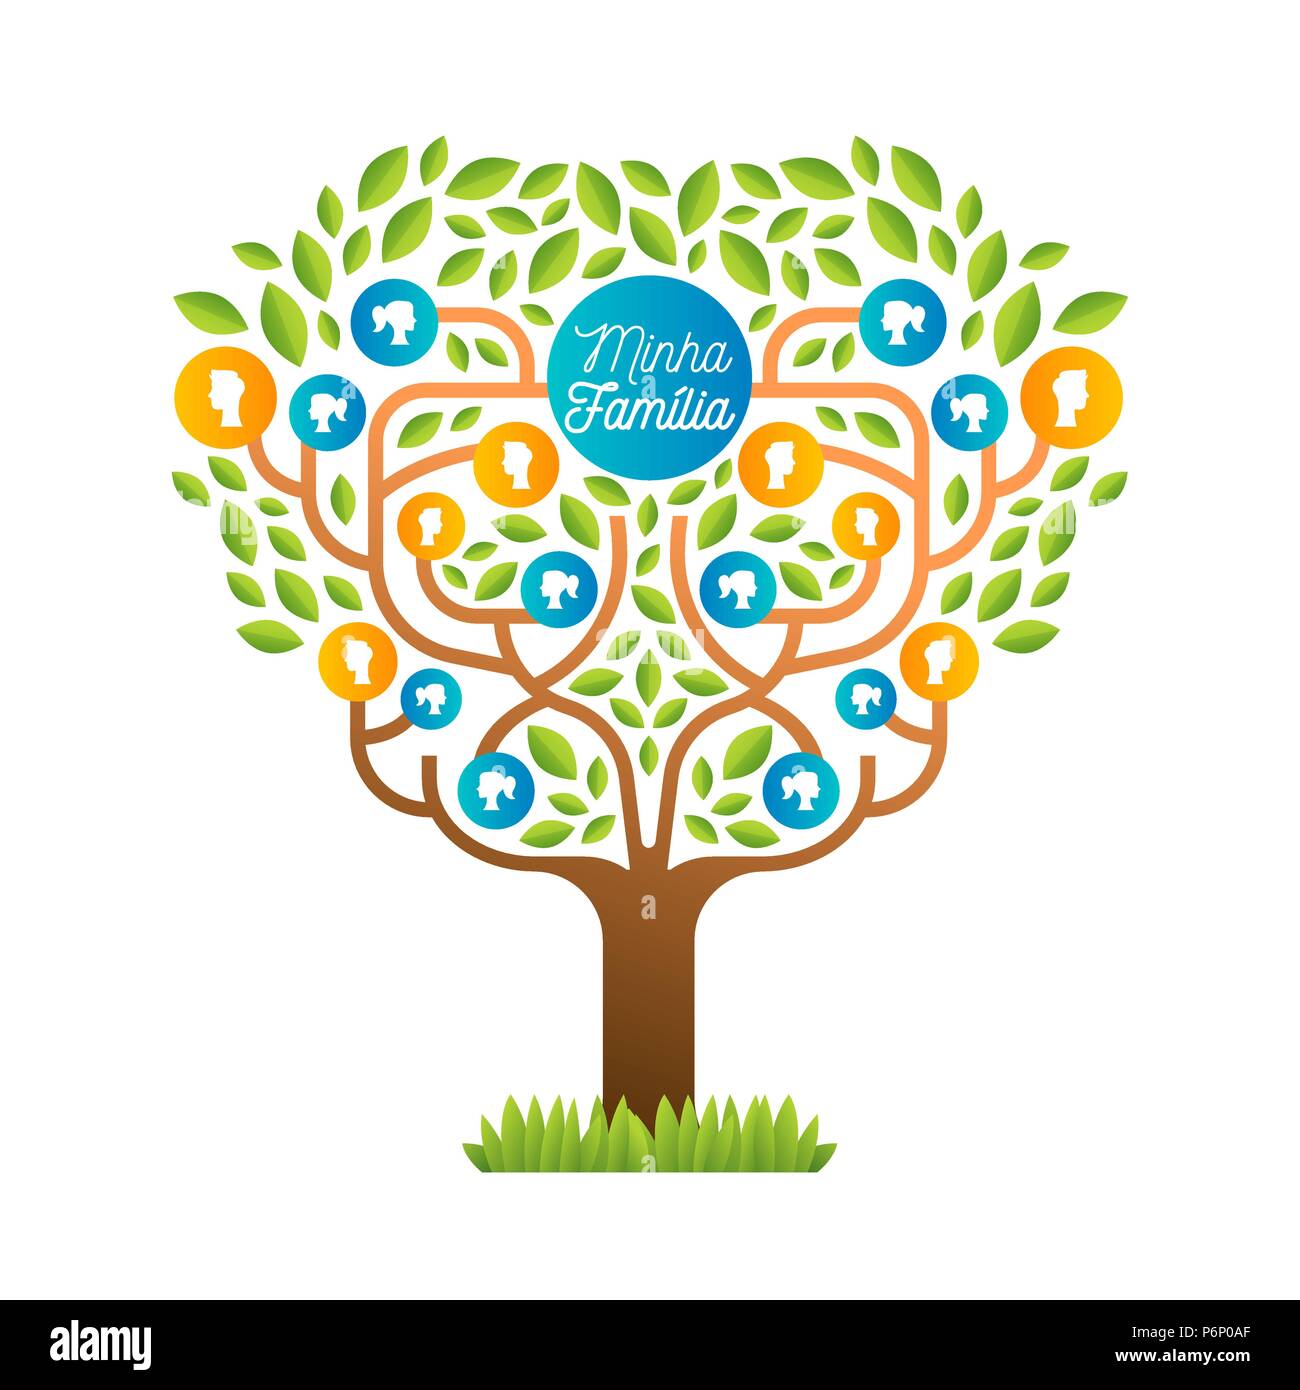 Big family tree template in portuguese language, illustration concept with people icons and colorful green leaves for life generations history. EPS10  Stock Vector